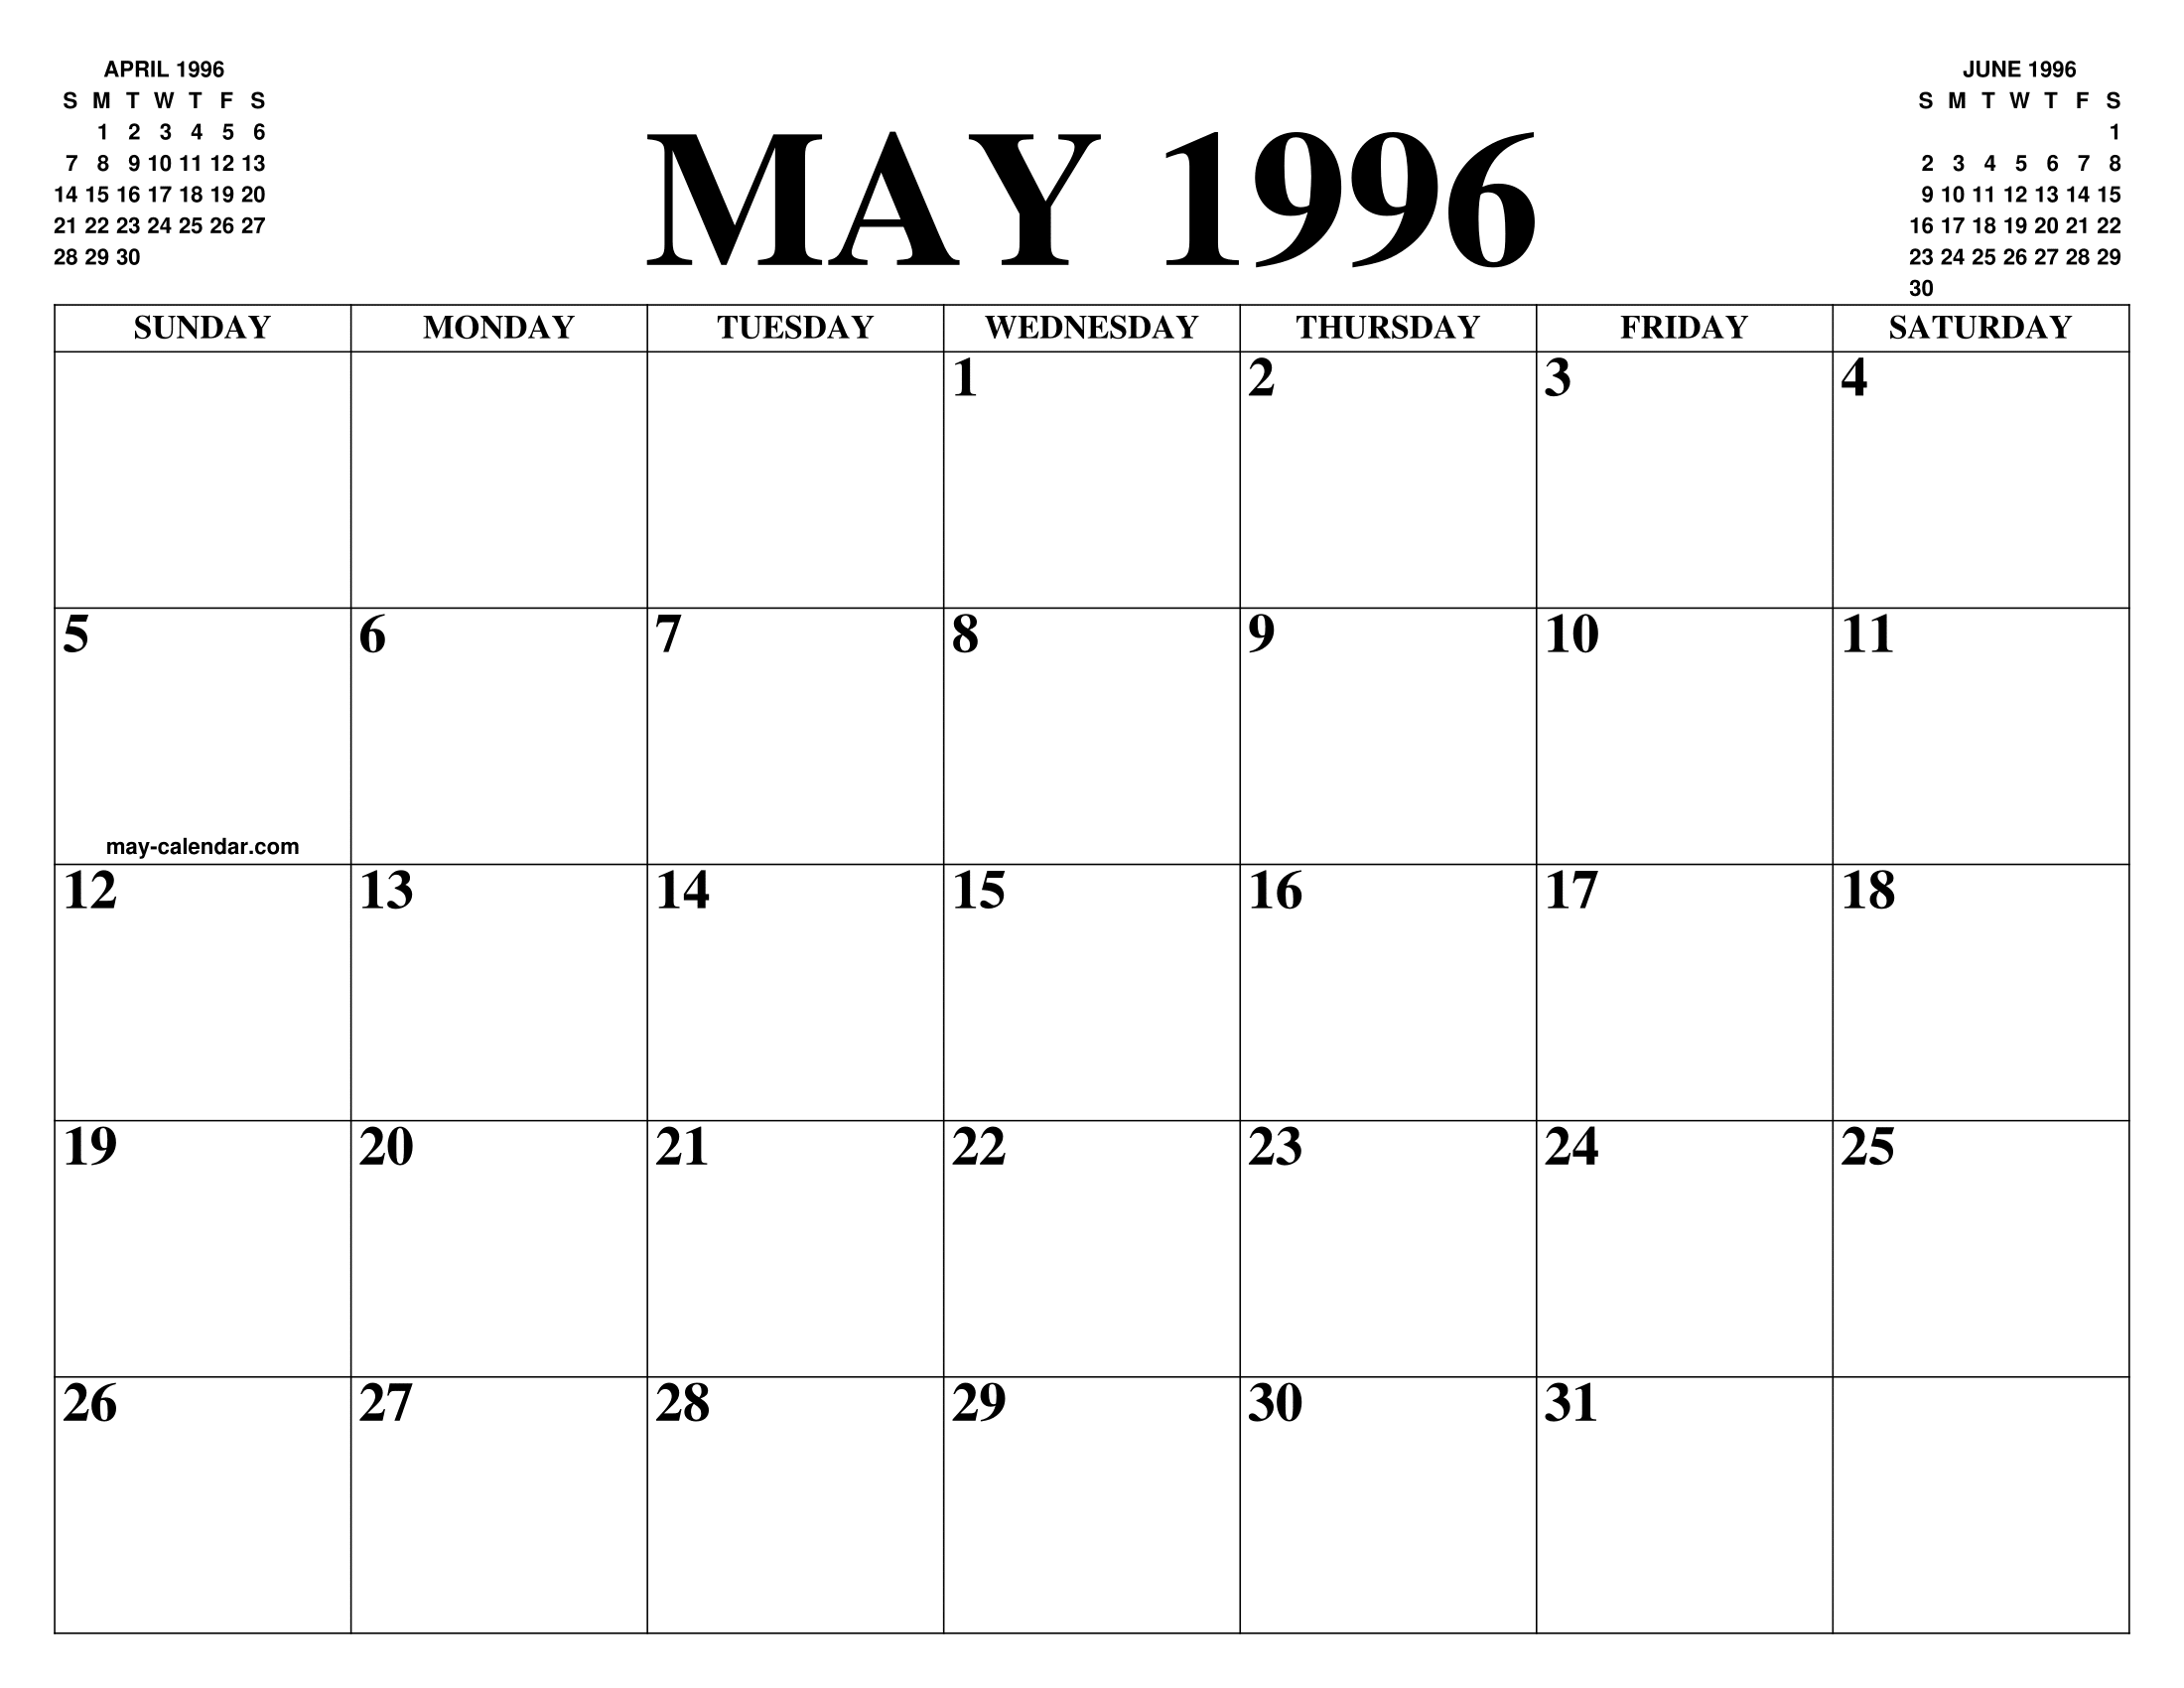 MAY 1996 CALENDAR OF THE MONTH: FREE PRINTABLE MAY CALENDAR OF THE YEAR -  AGENDA